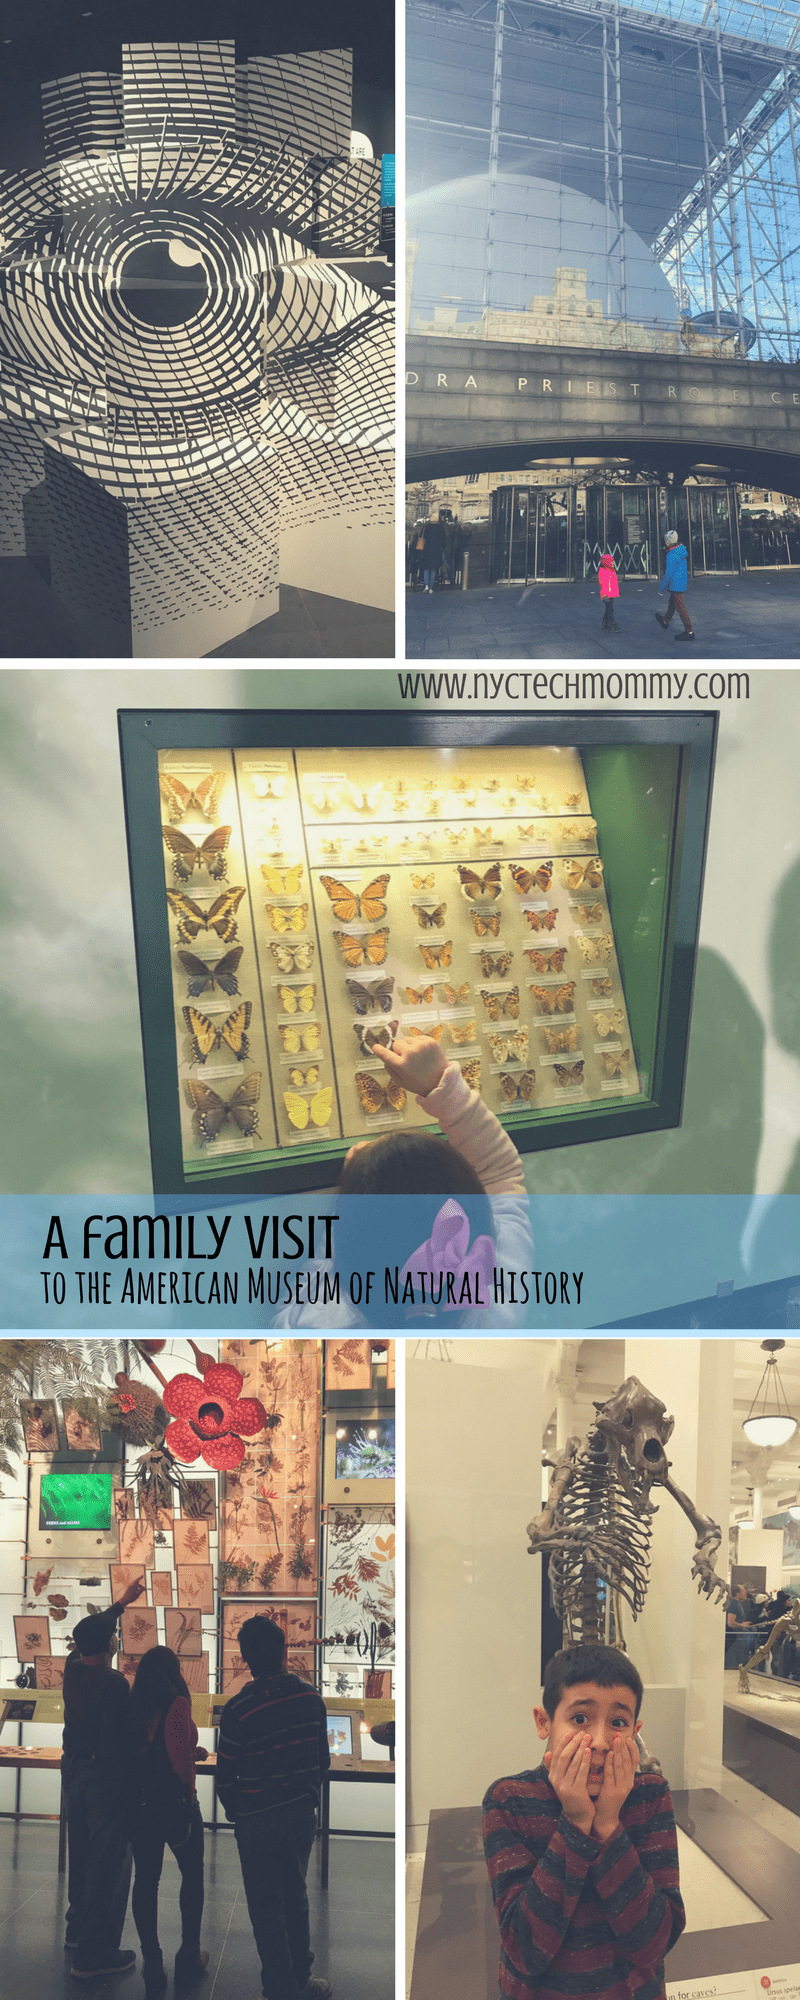 There are so many reasons for a family visit to the American Museum of Natural History in #NYC. Here's a great list of must sees to help as you plan your museum visit + a few things you need to know before you go!